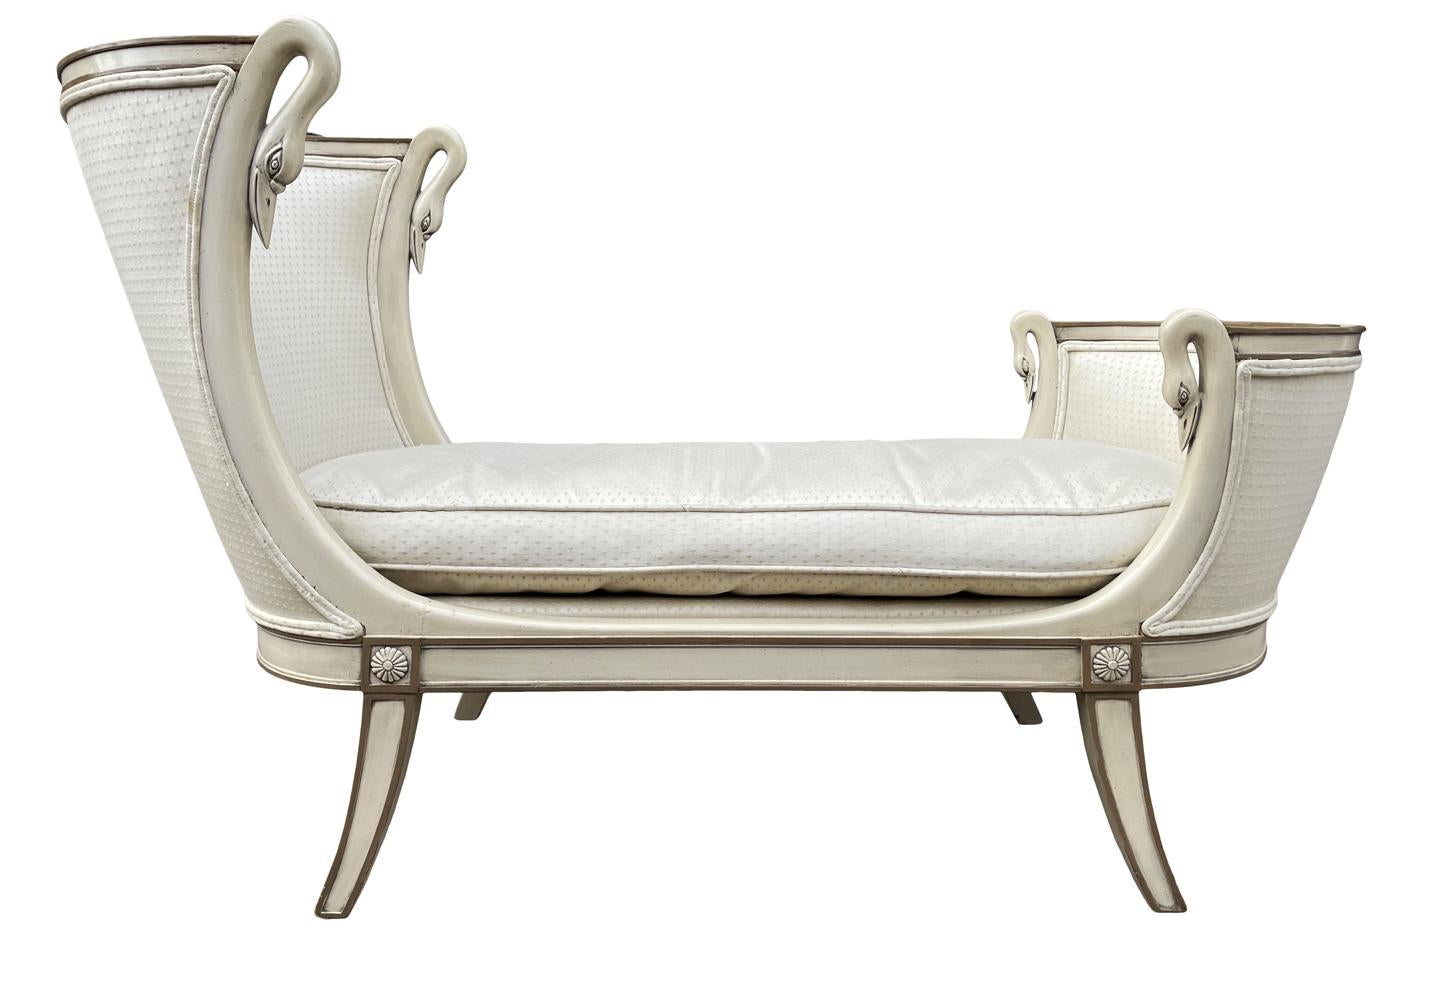 Hollywood Regency Italian Petite Chaise Lounge Chair in Cream with Swan Heads For Sale 3